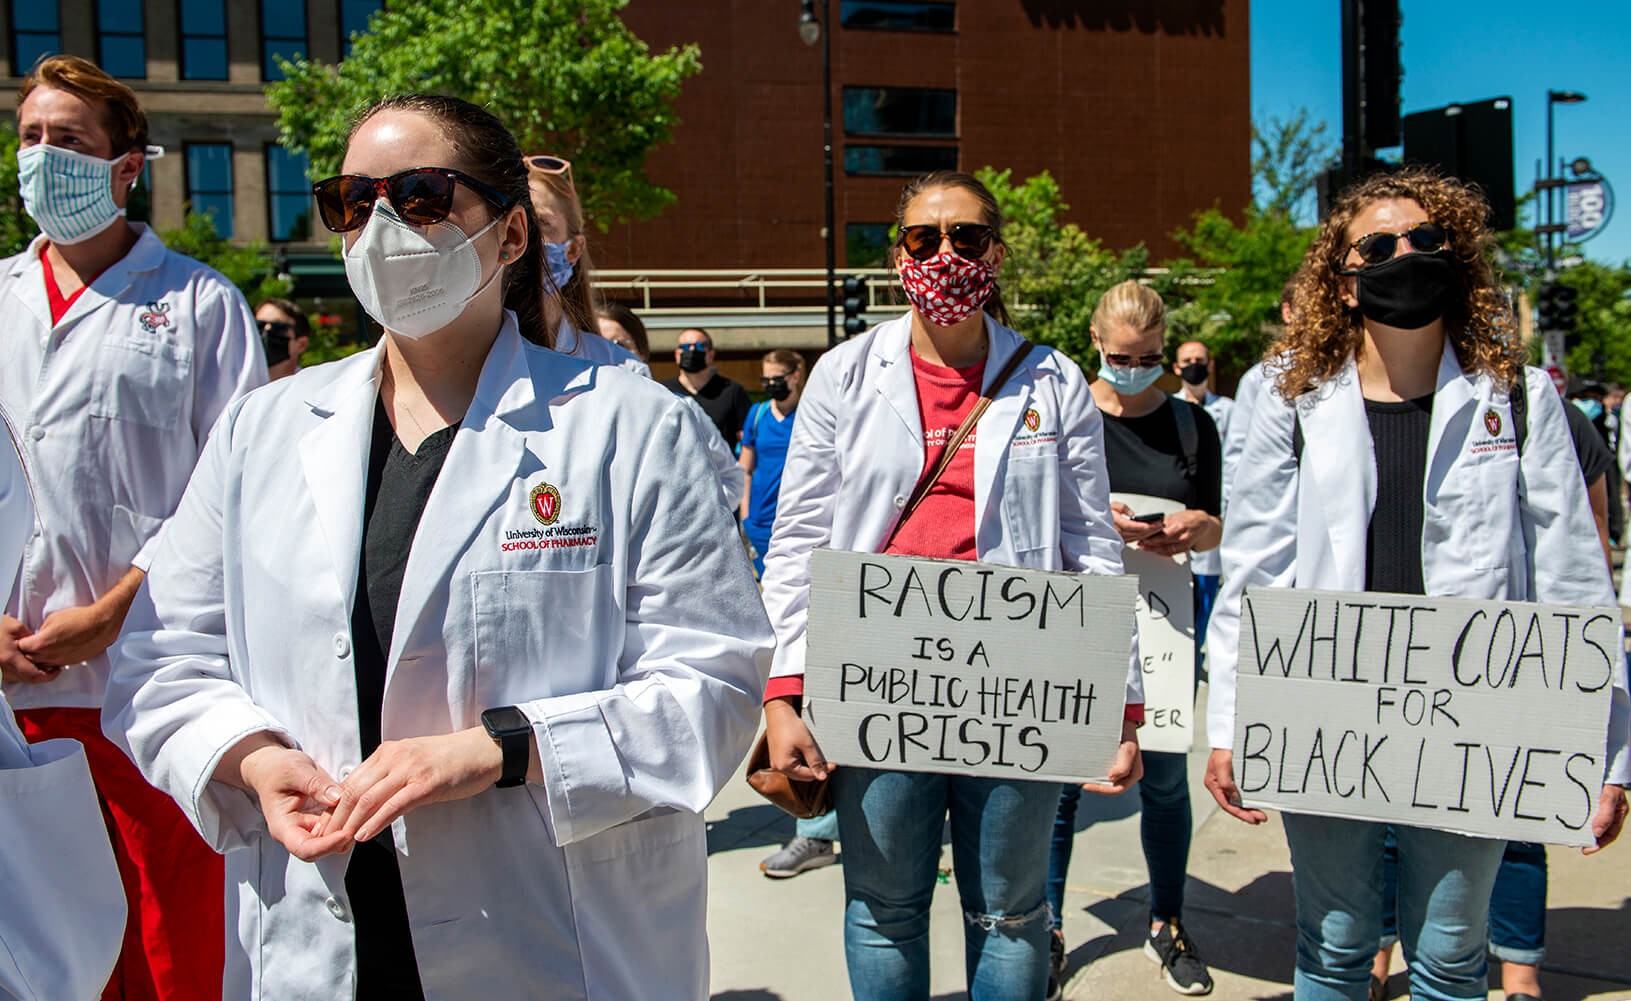 Students joining in on the white coats for black lives march